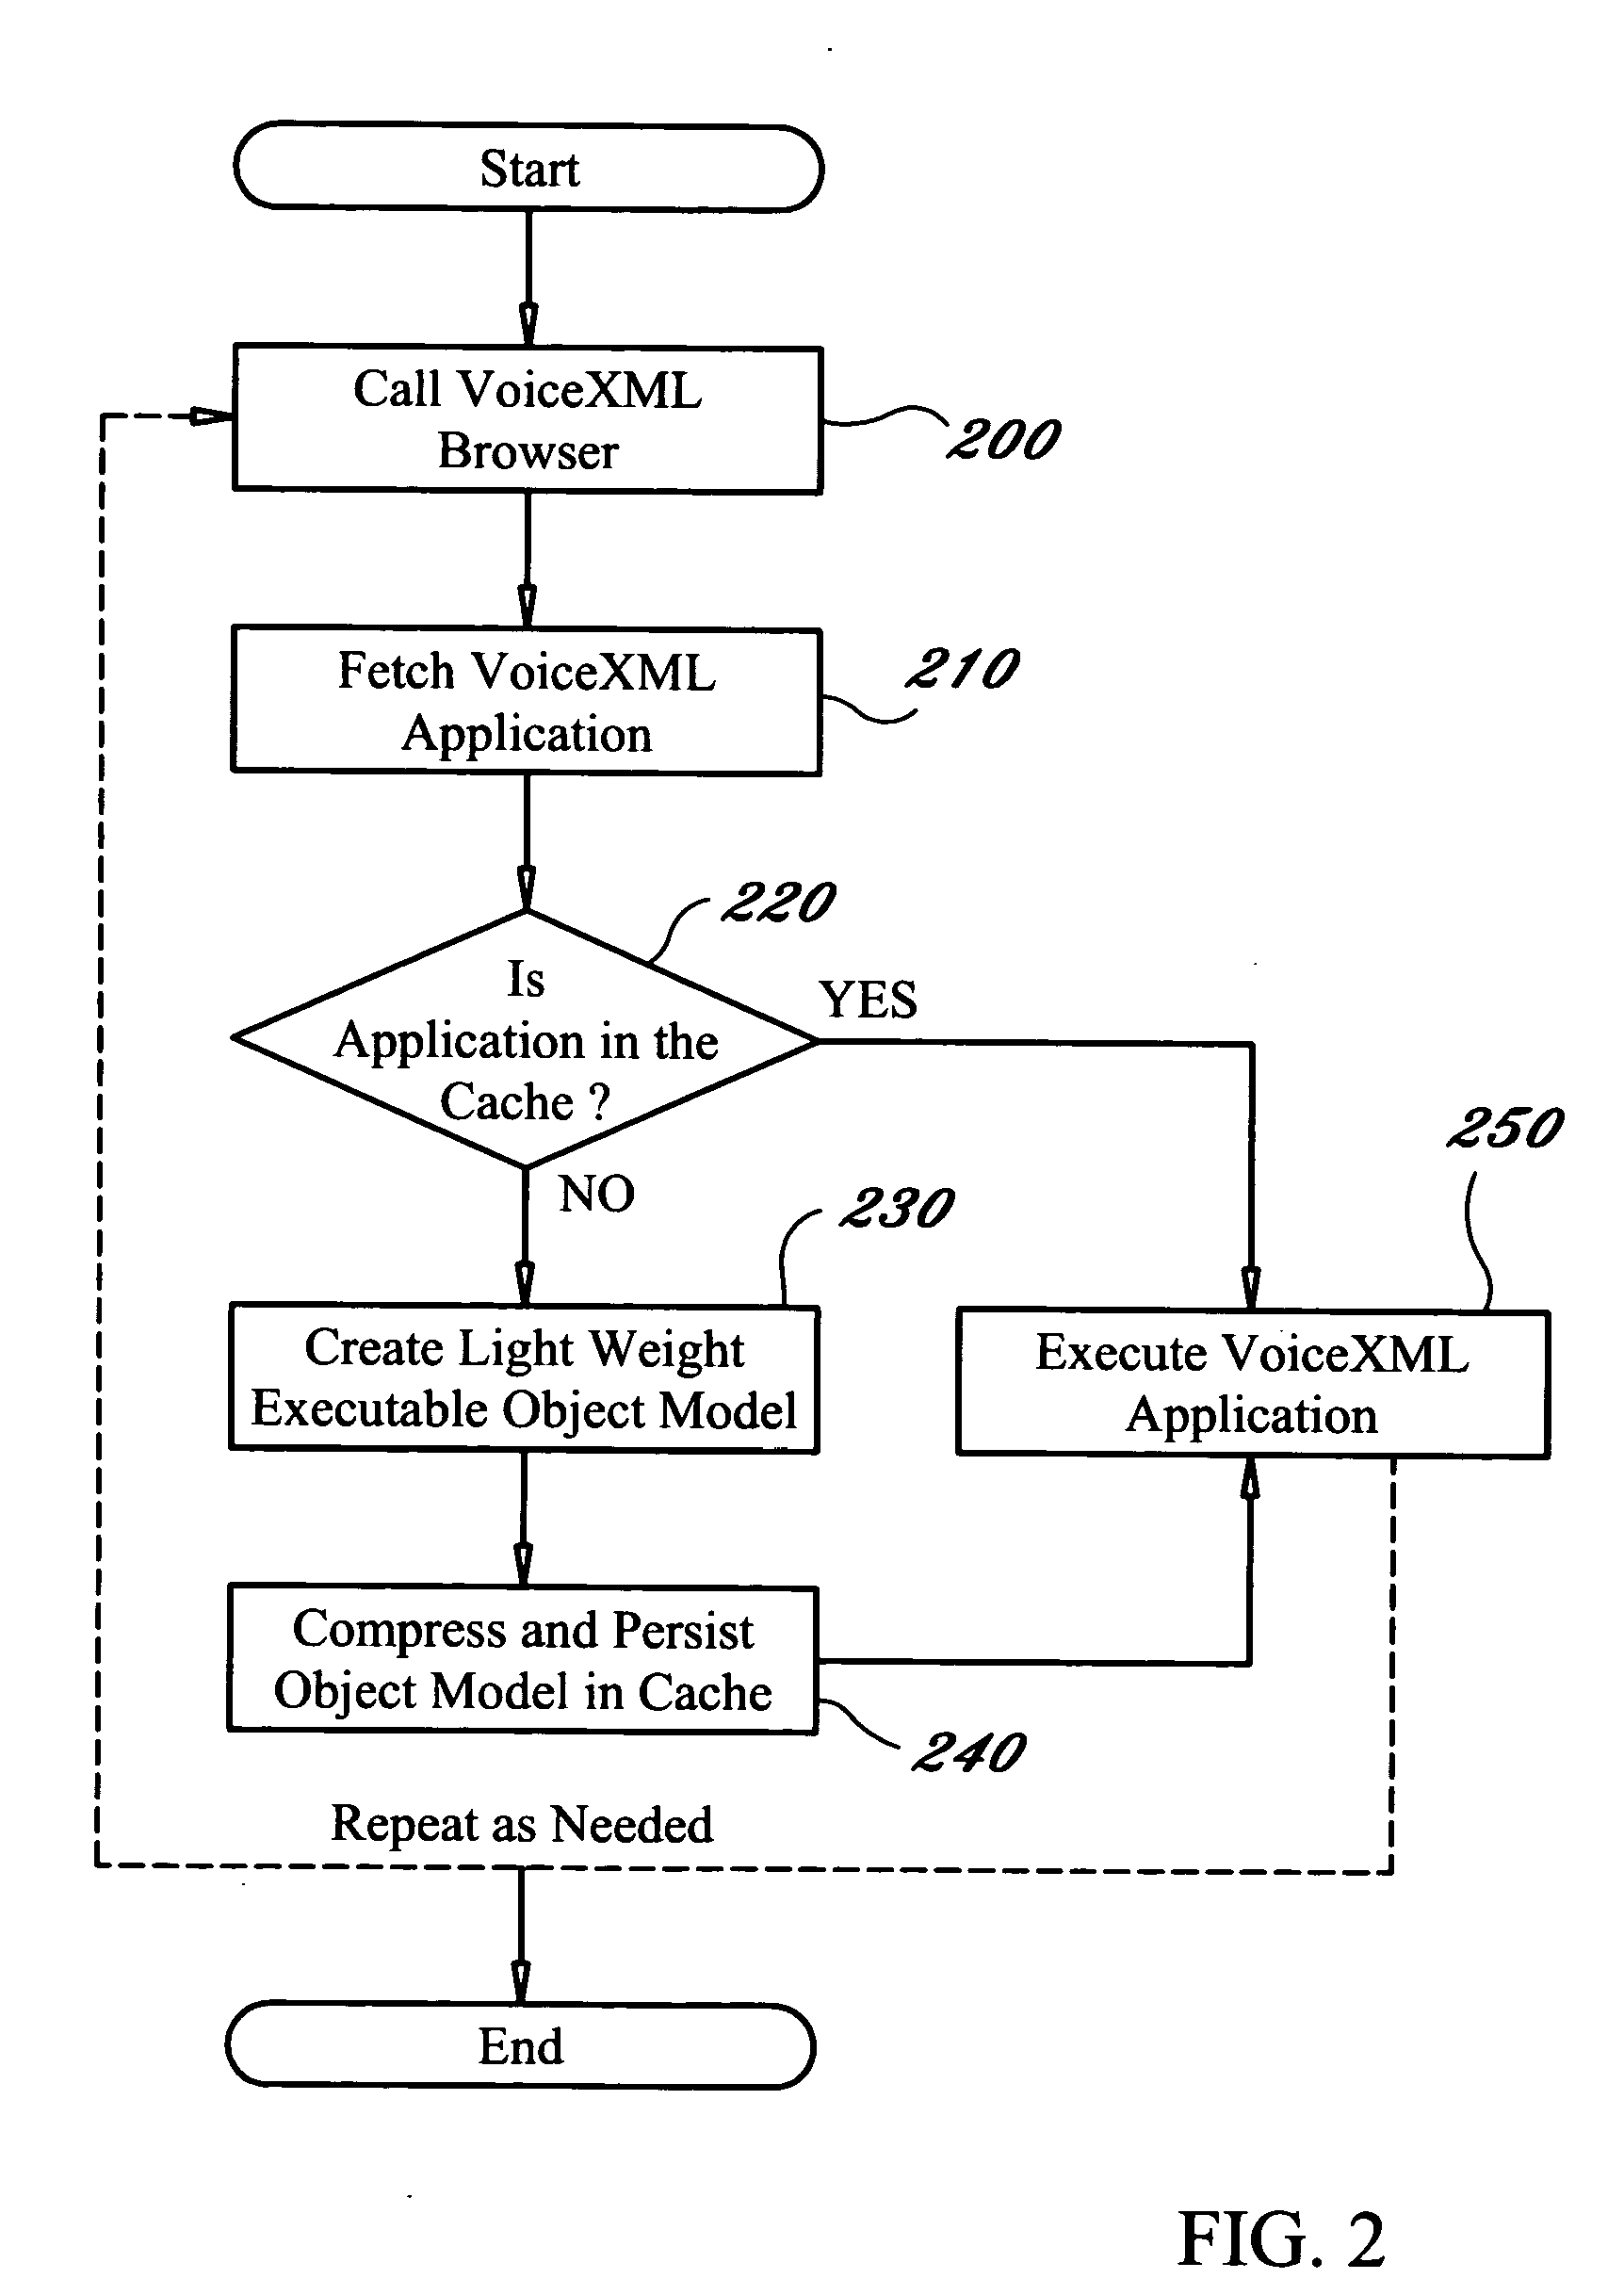 Method and procedure for compiling and caching VoiceXML documents in a Voice XML interpreter